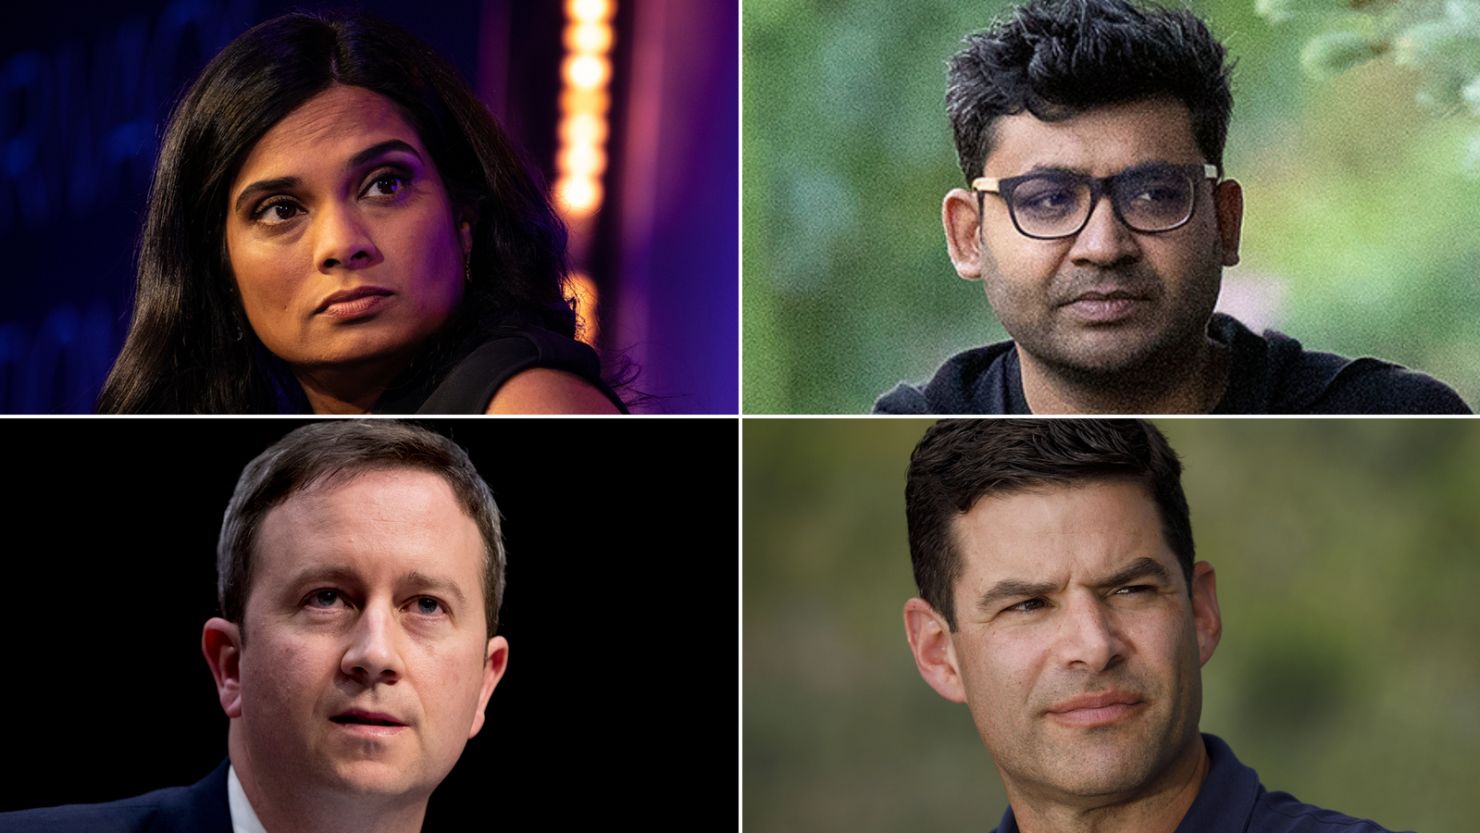 Left to right, clockwise: Twitter former executives Vijaya Gadde, Parag Agrawal, Ned Segal, Sean Edgett, who have filed a lawsuit against Elon Musk over severance payments they say they are due.